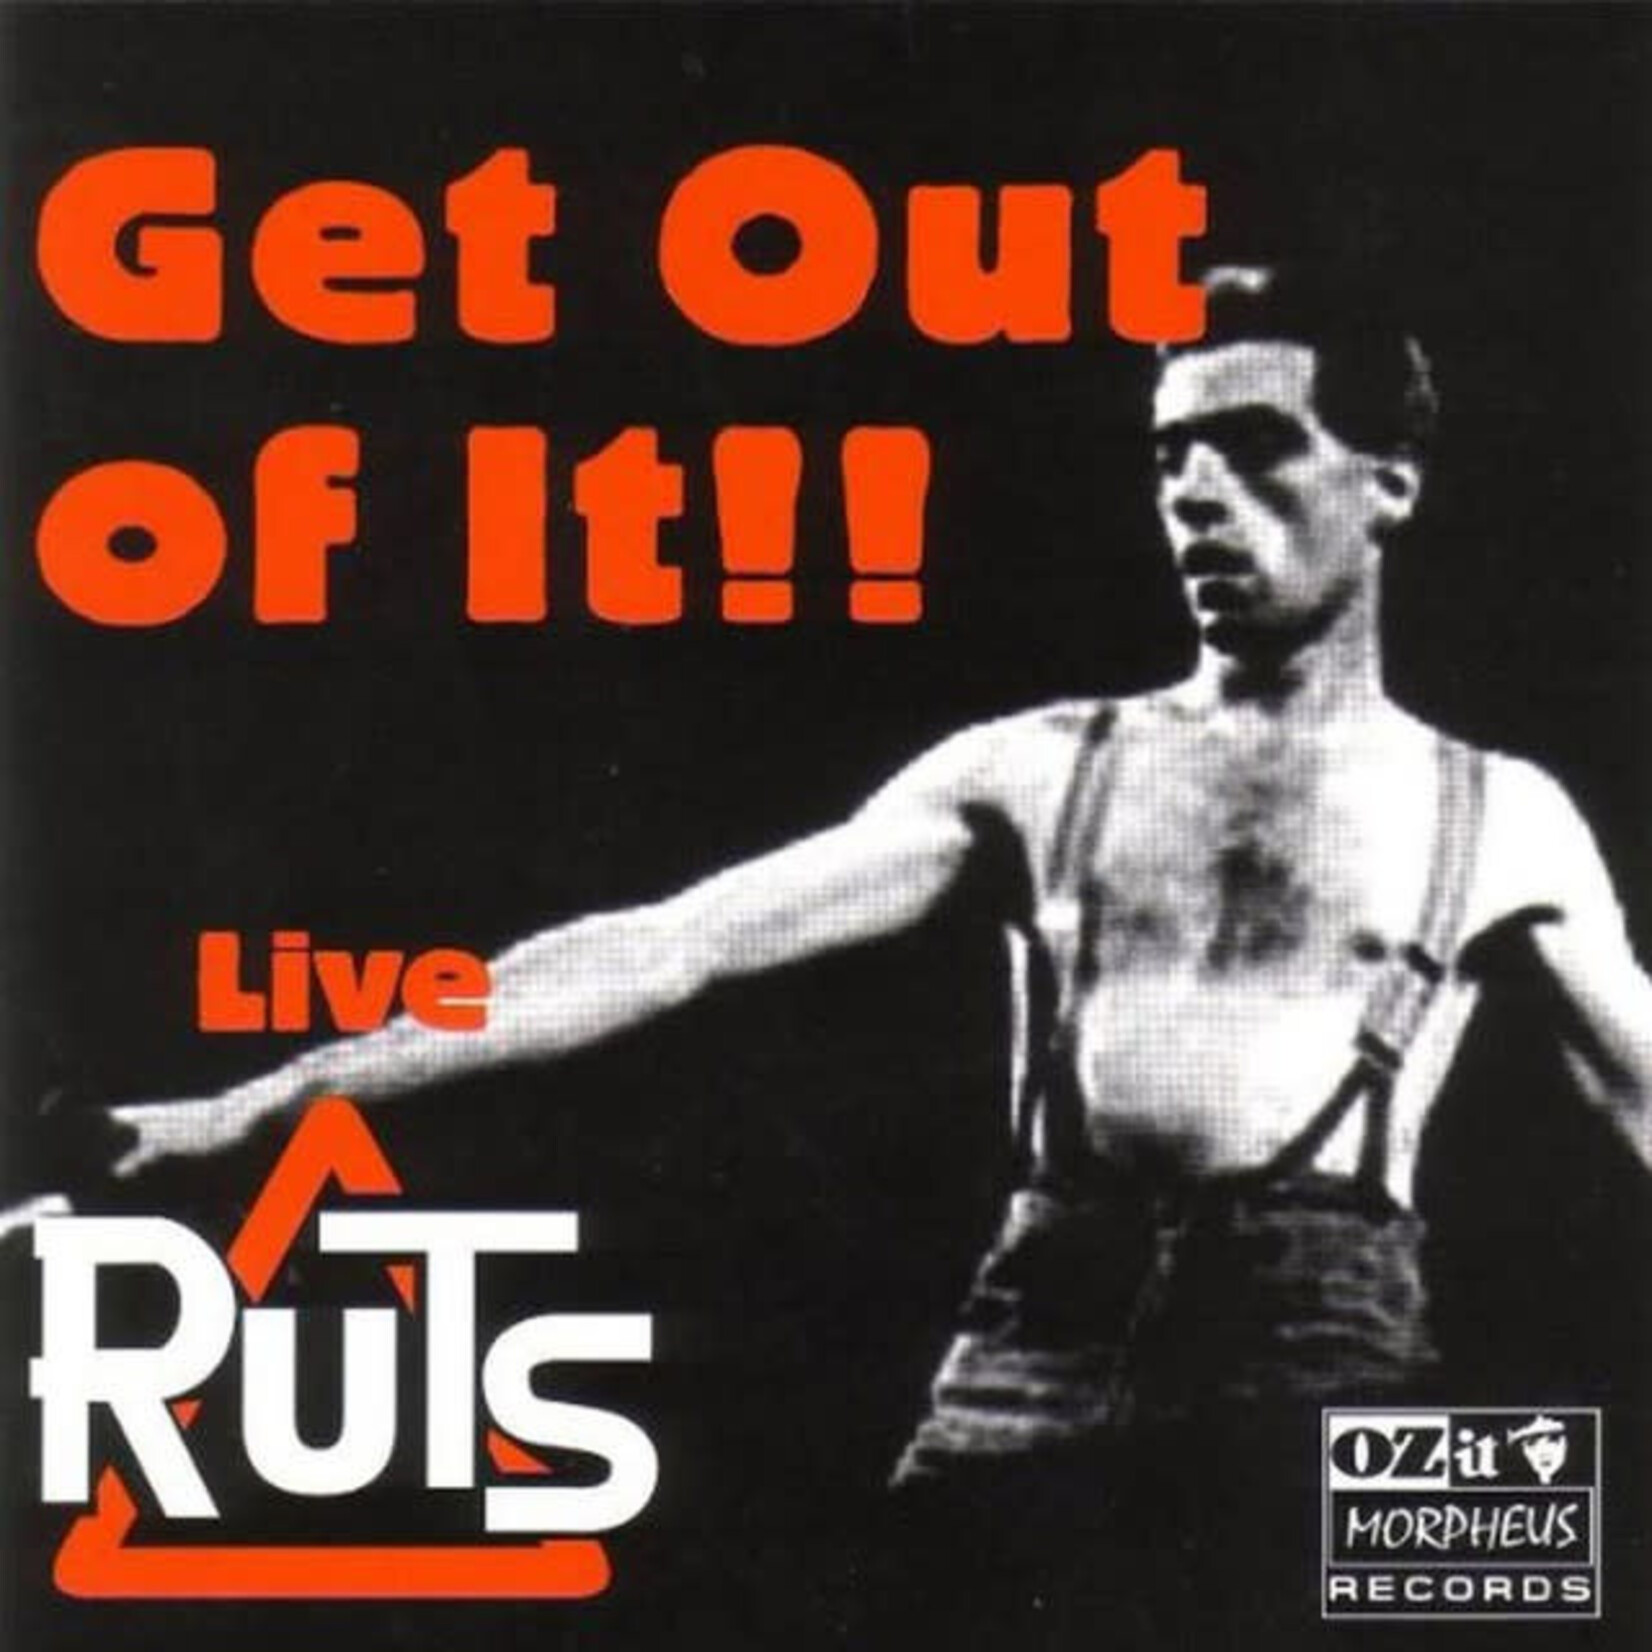 Ruts - Get Out Of It!! Live [CD]